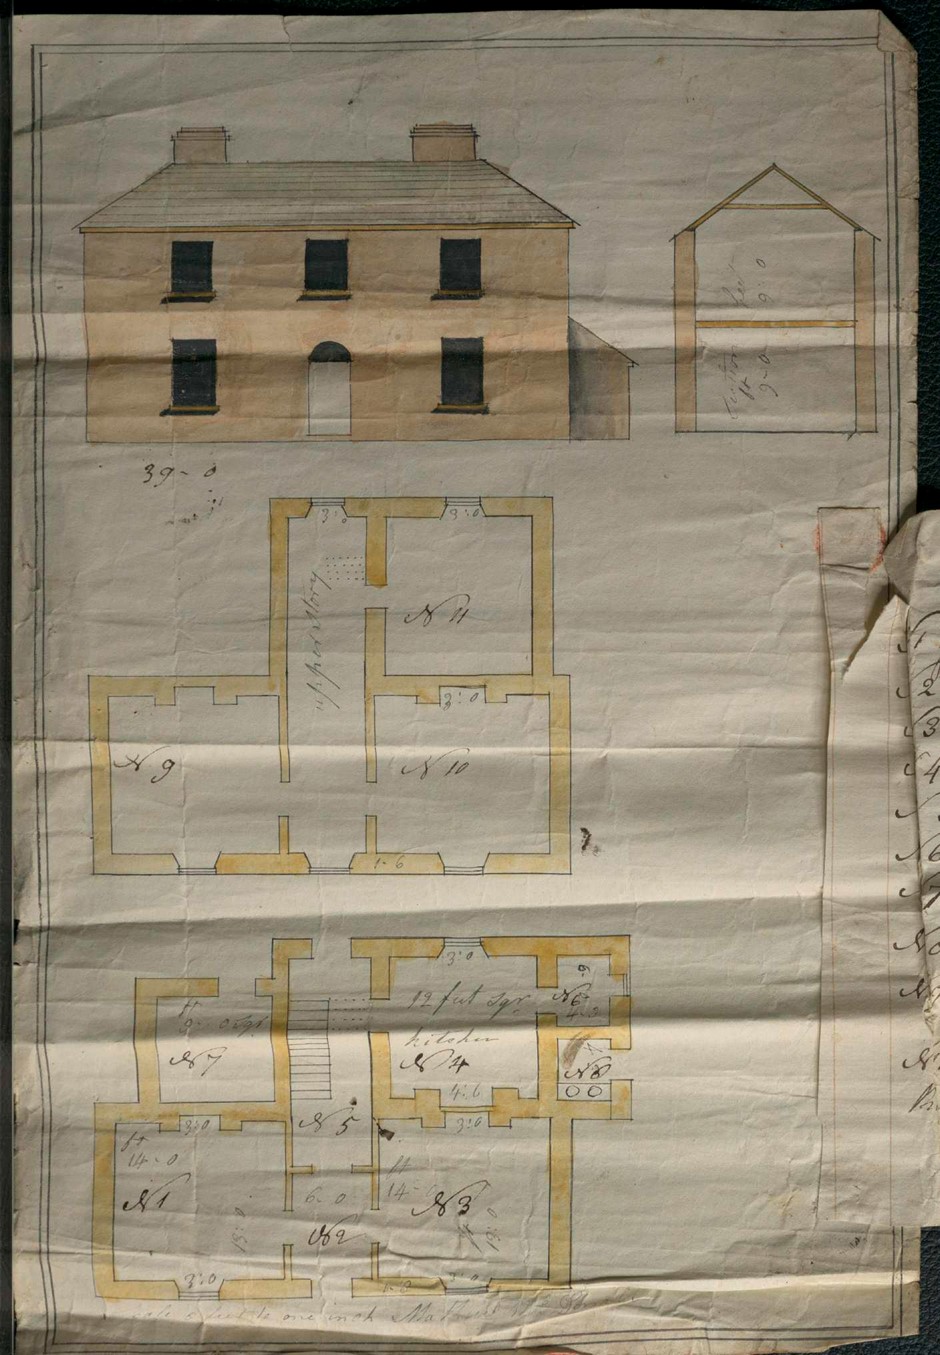 Mathew MacDonal, “Donabate. Estimate of a Glebe House to be built in the parish of Donabate by Matthew McDonnell furnishing all Materials. Signed Mathew MacDonal,” RCB Library - Architectural Drawings, accessed April 4, 2023, https://archdrawing.ireland.anglican.org/items/show/9491.